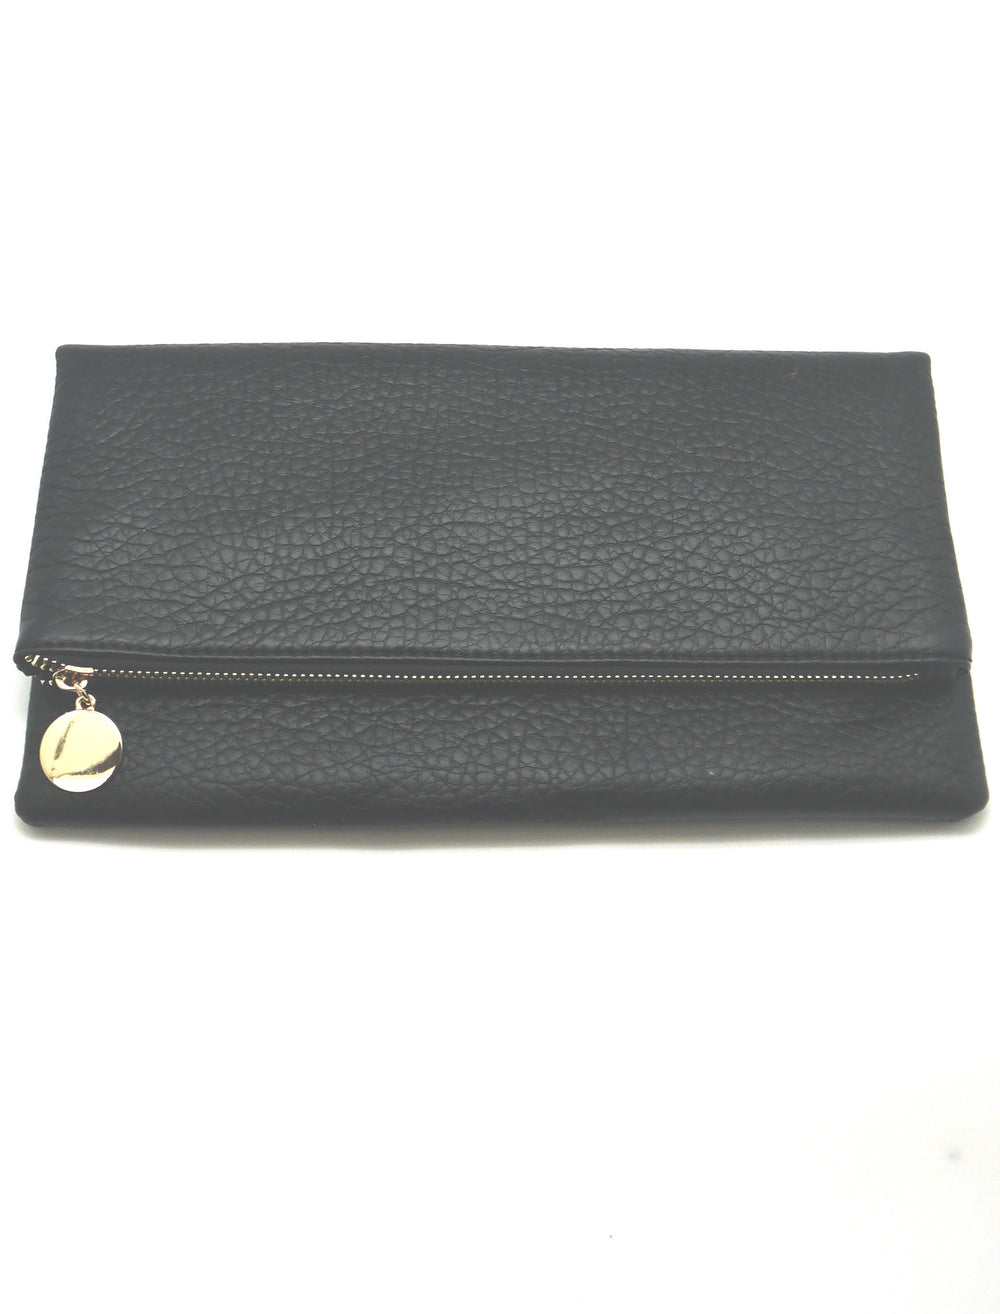 Clare V Black Pebbled Leather Clutch